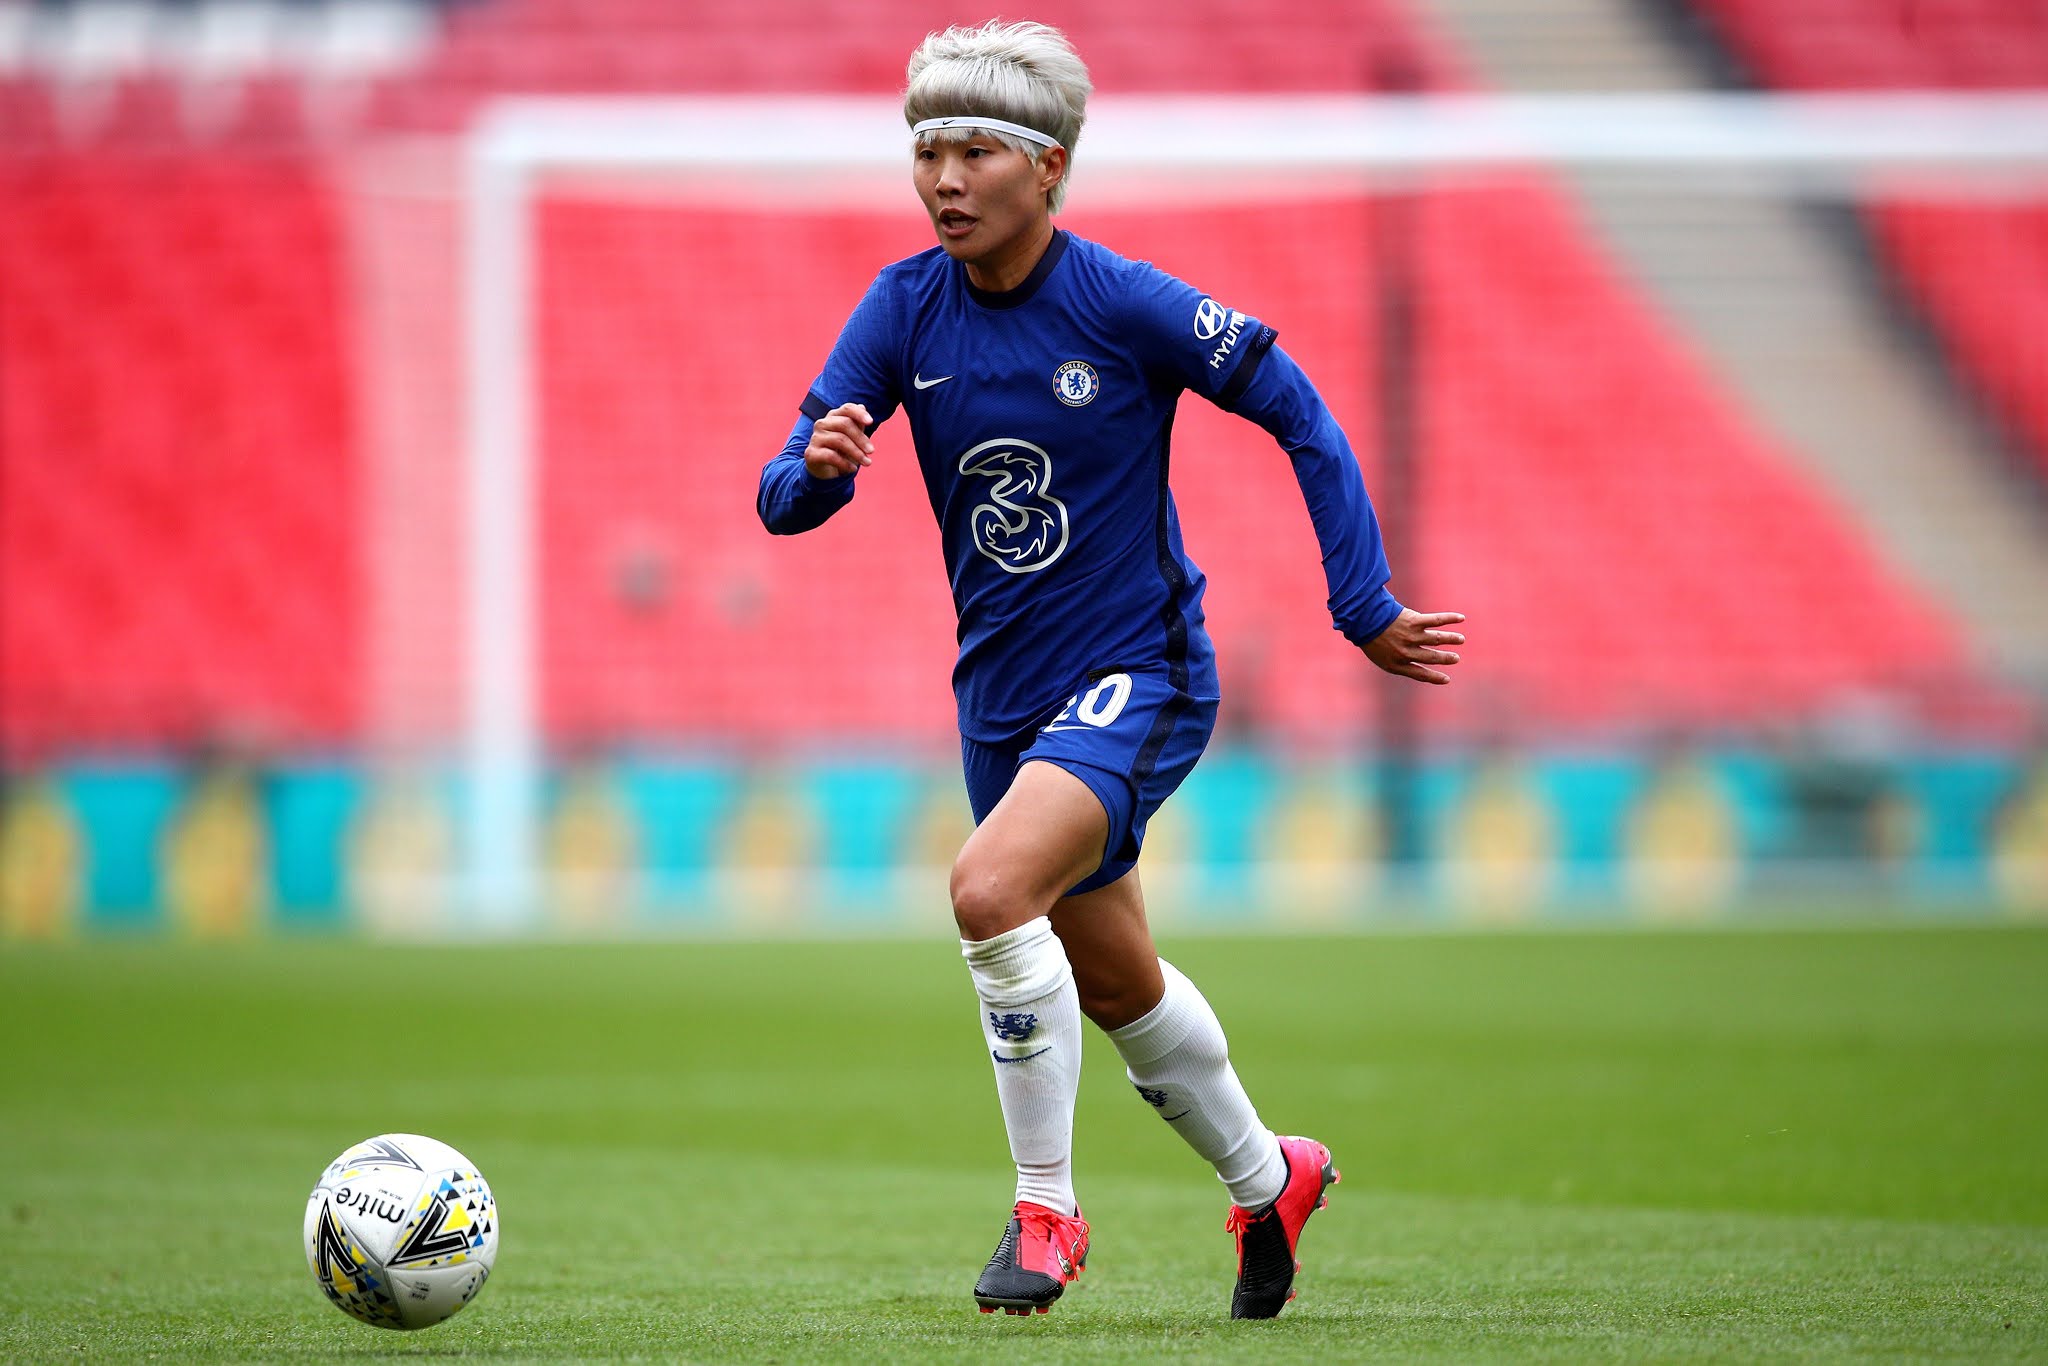 Uefa Women S Champions League Final Preview Chelsea Vs Barcelona K League United South Korean Football News Opinions Match Previews And Score Predictions